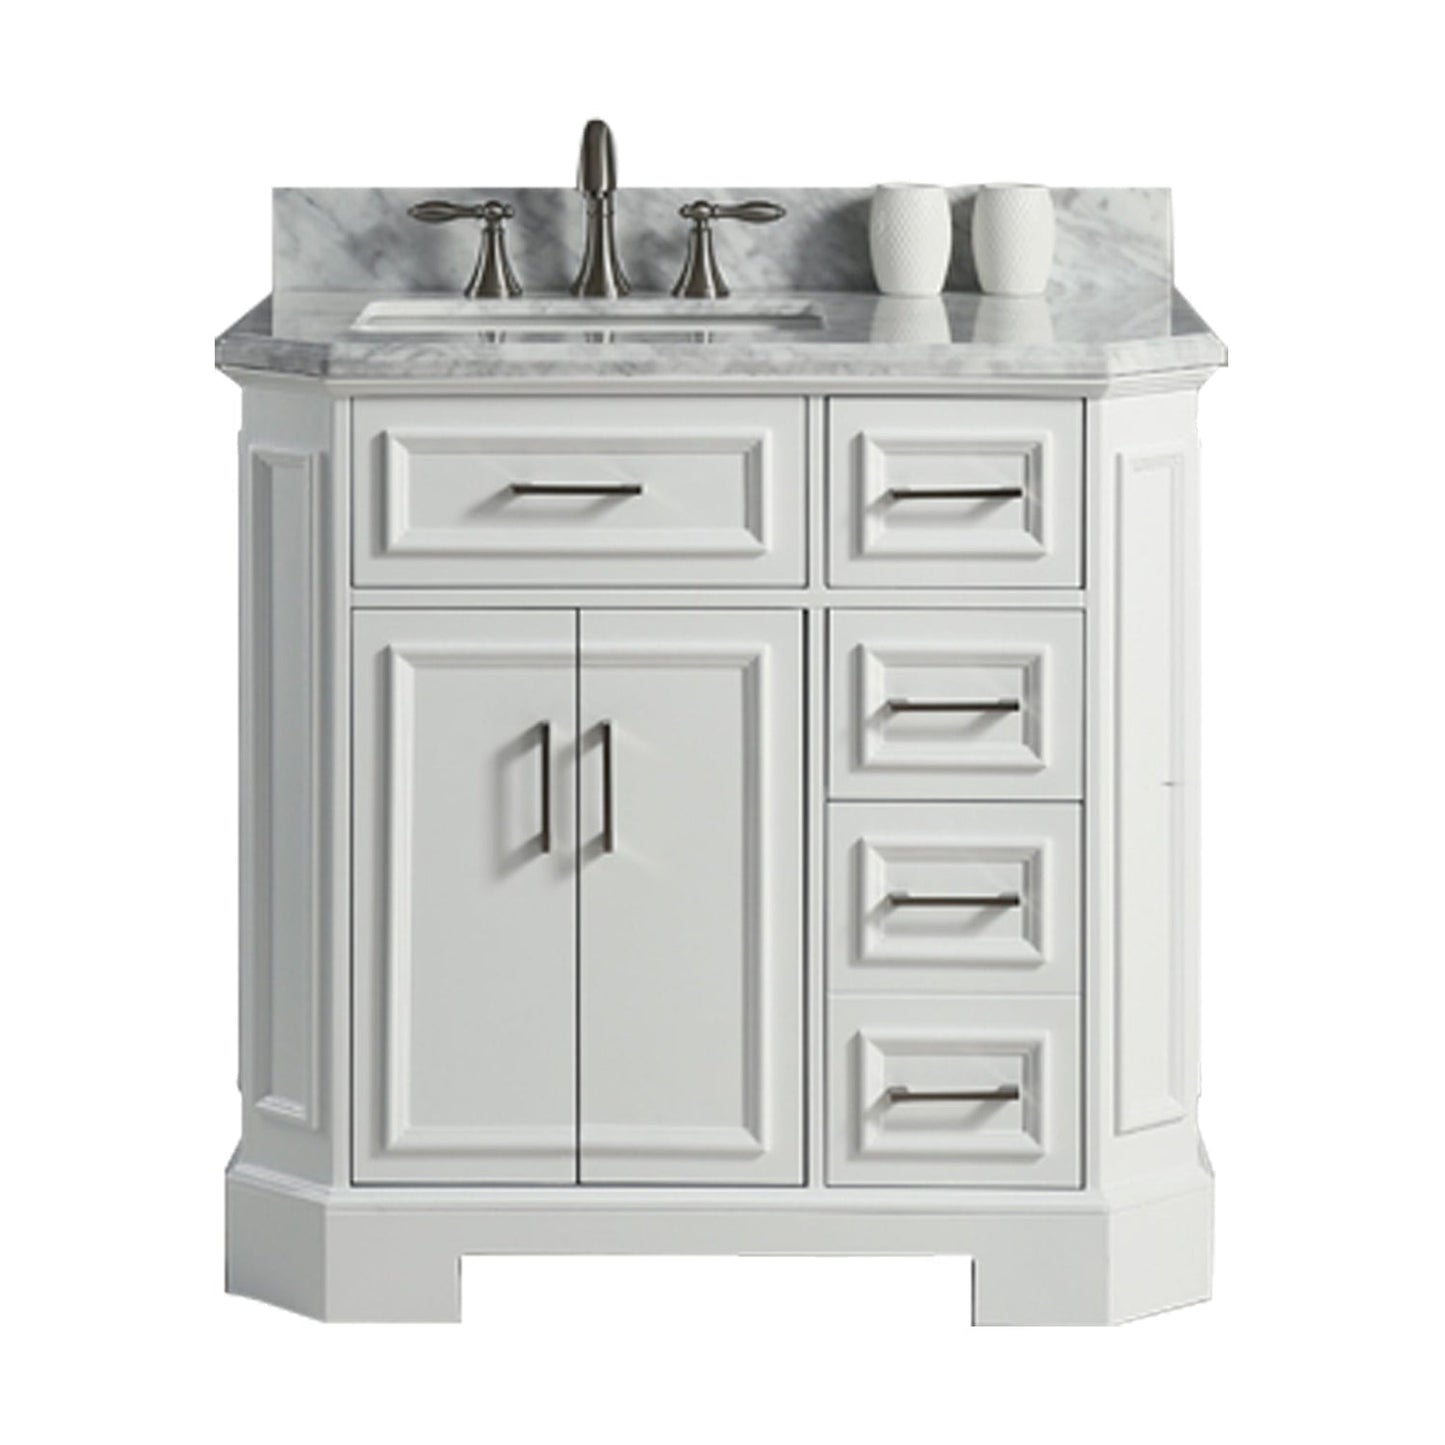 Eviva Glory 42" x 33" White Bathroom Vanity With Carrara Marble Countertop and Single Porcelain Sink